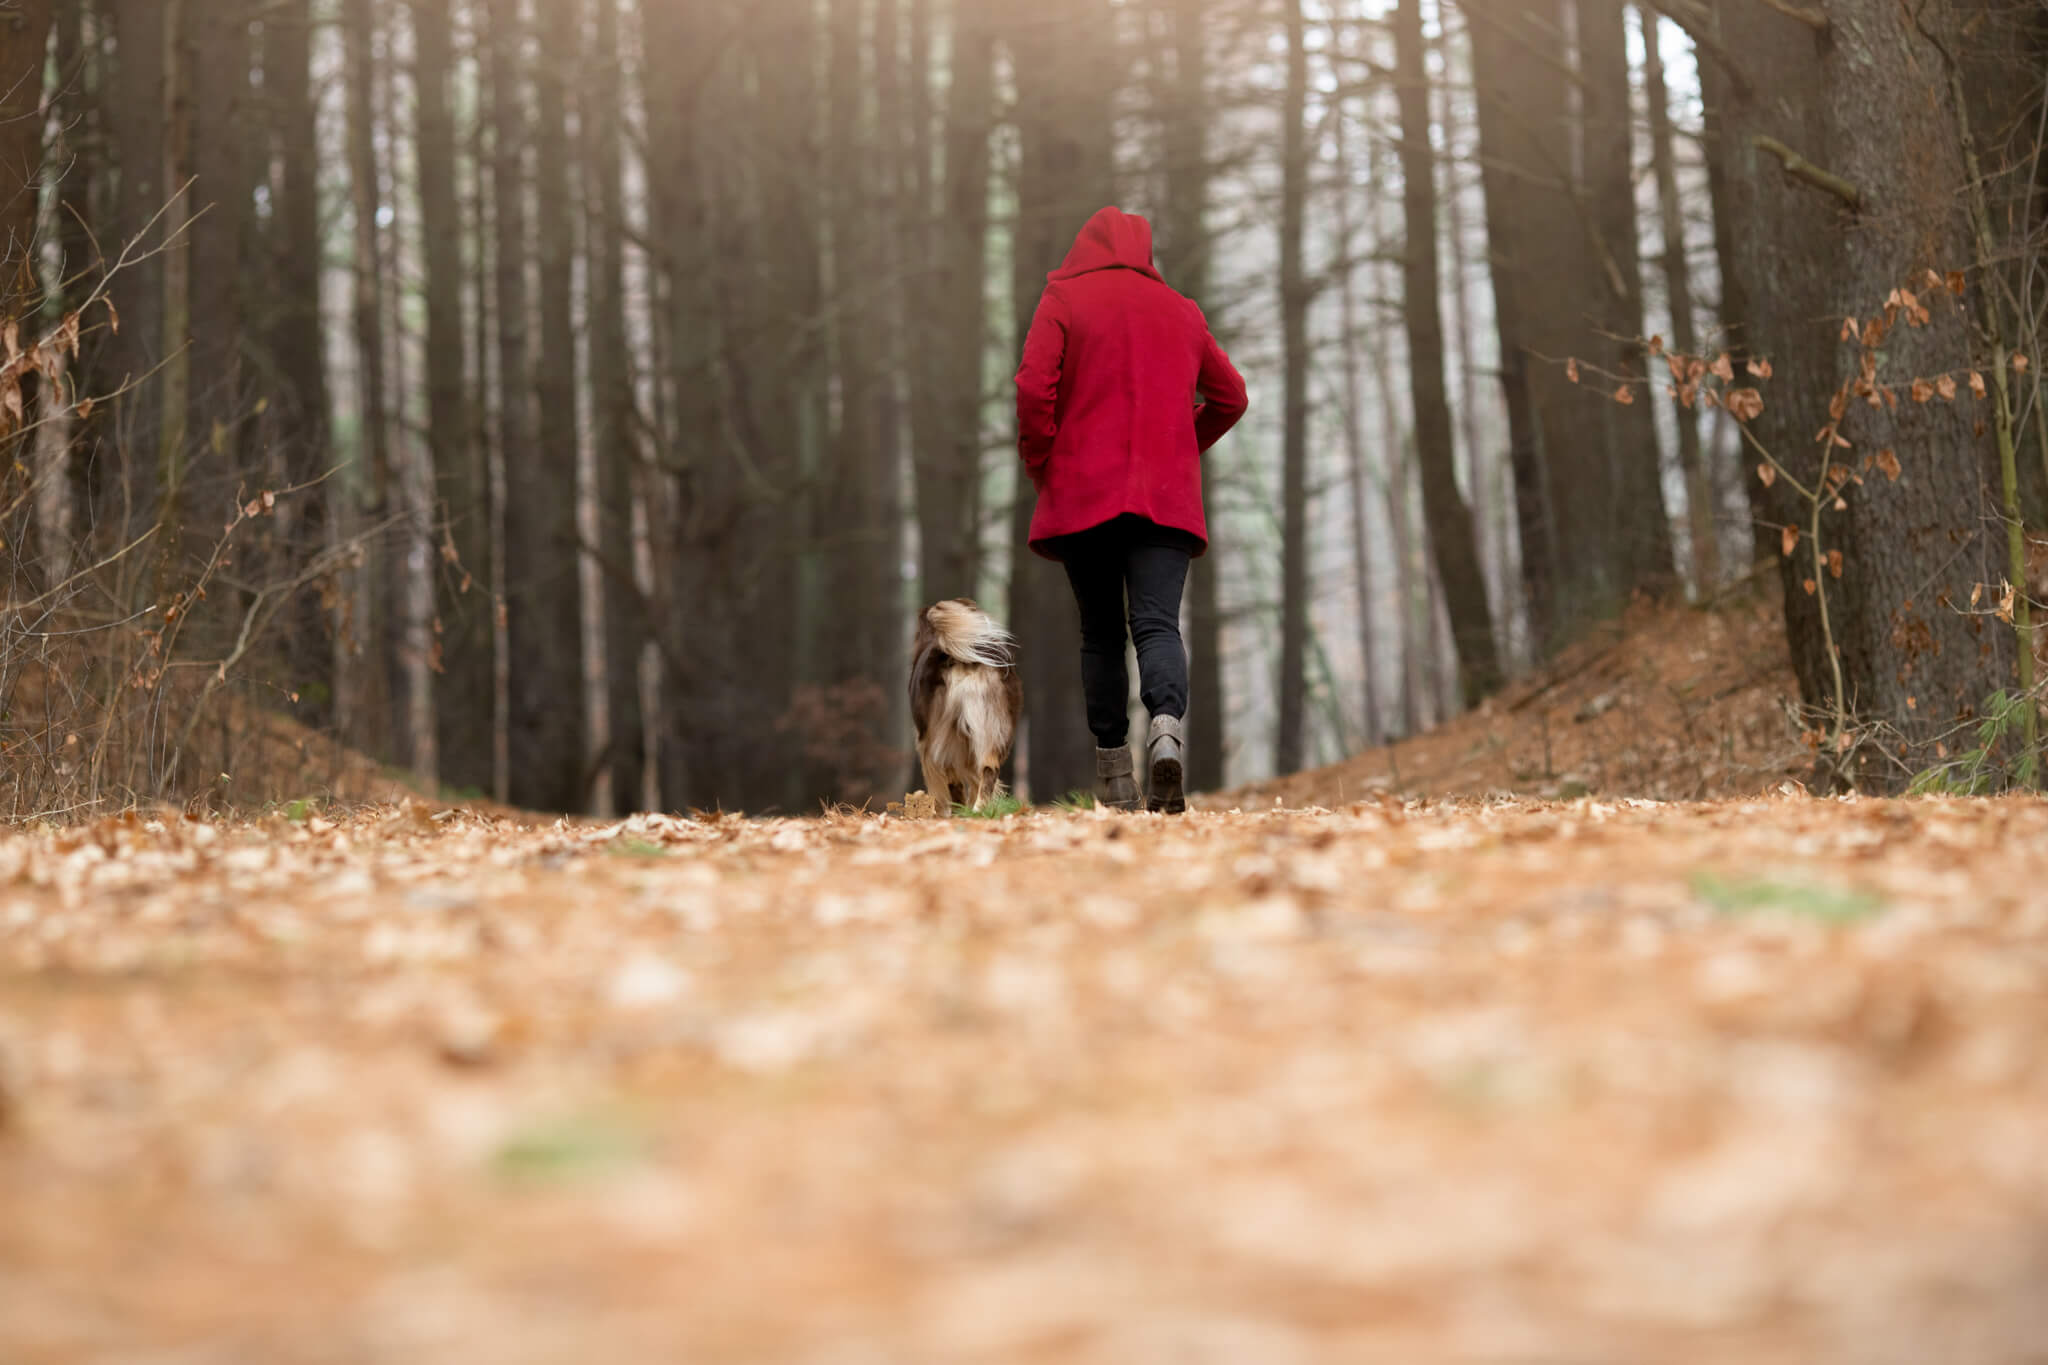 Woman in red jacket runs through thee forest with her dog